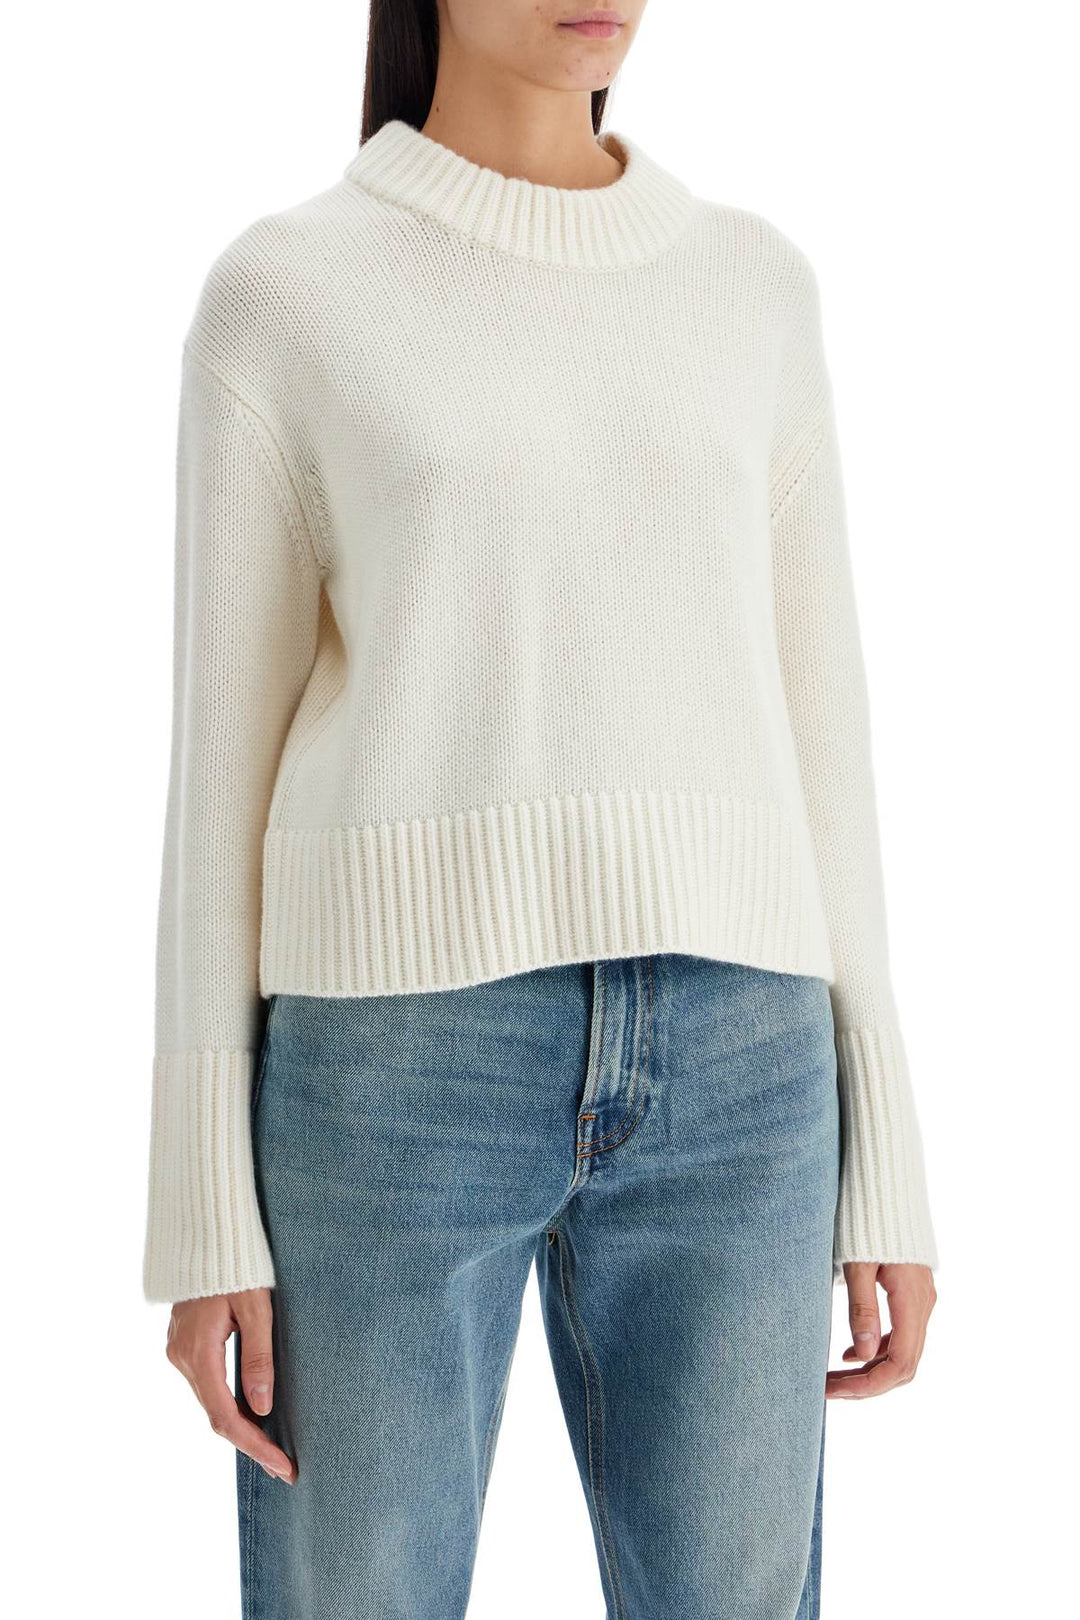 Lisa Yang Cashmere Sony Pullover Sweater   White